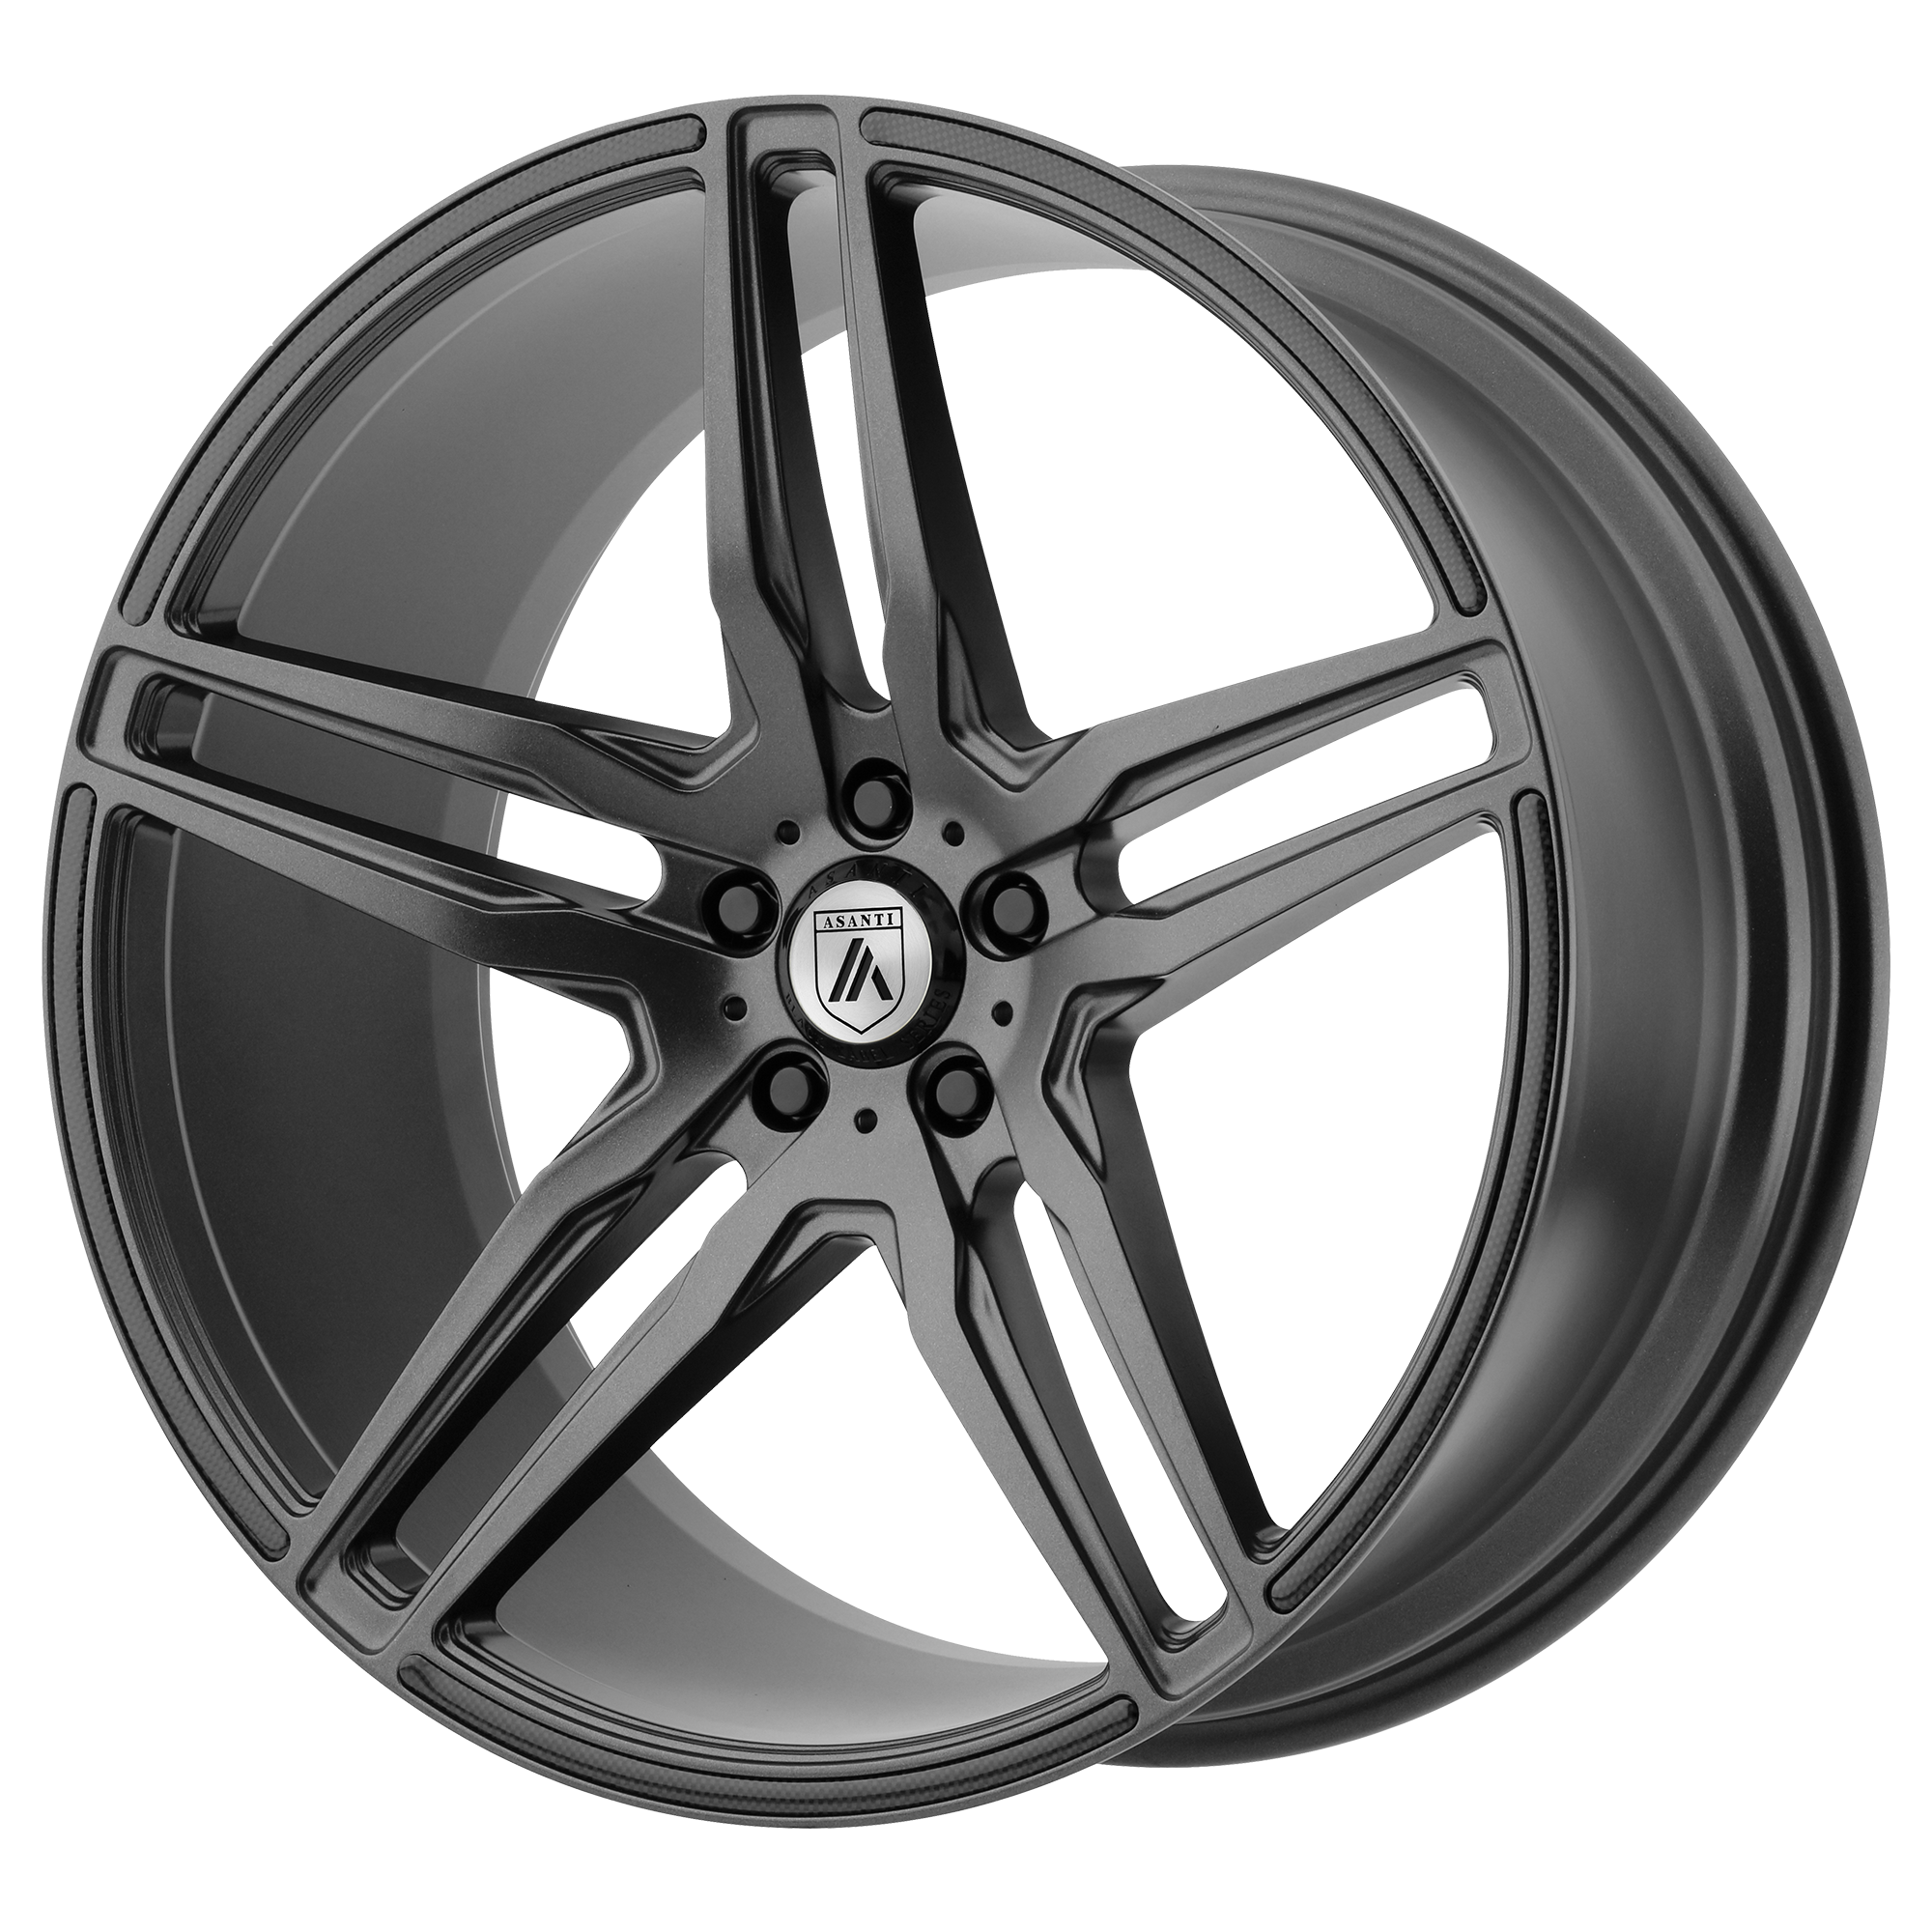 ORION 20x10.5 5x115.00 MATTE GRAPHITE (20 mm) - Tires and Engine Performance